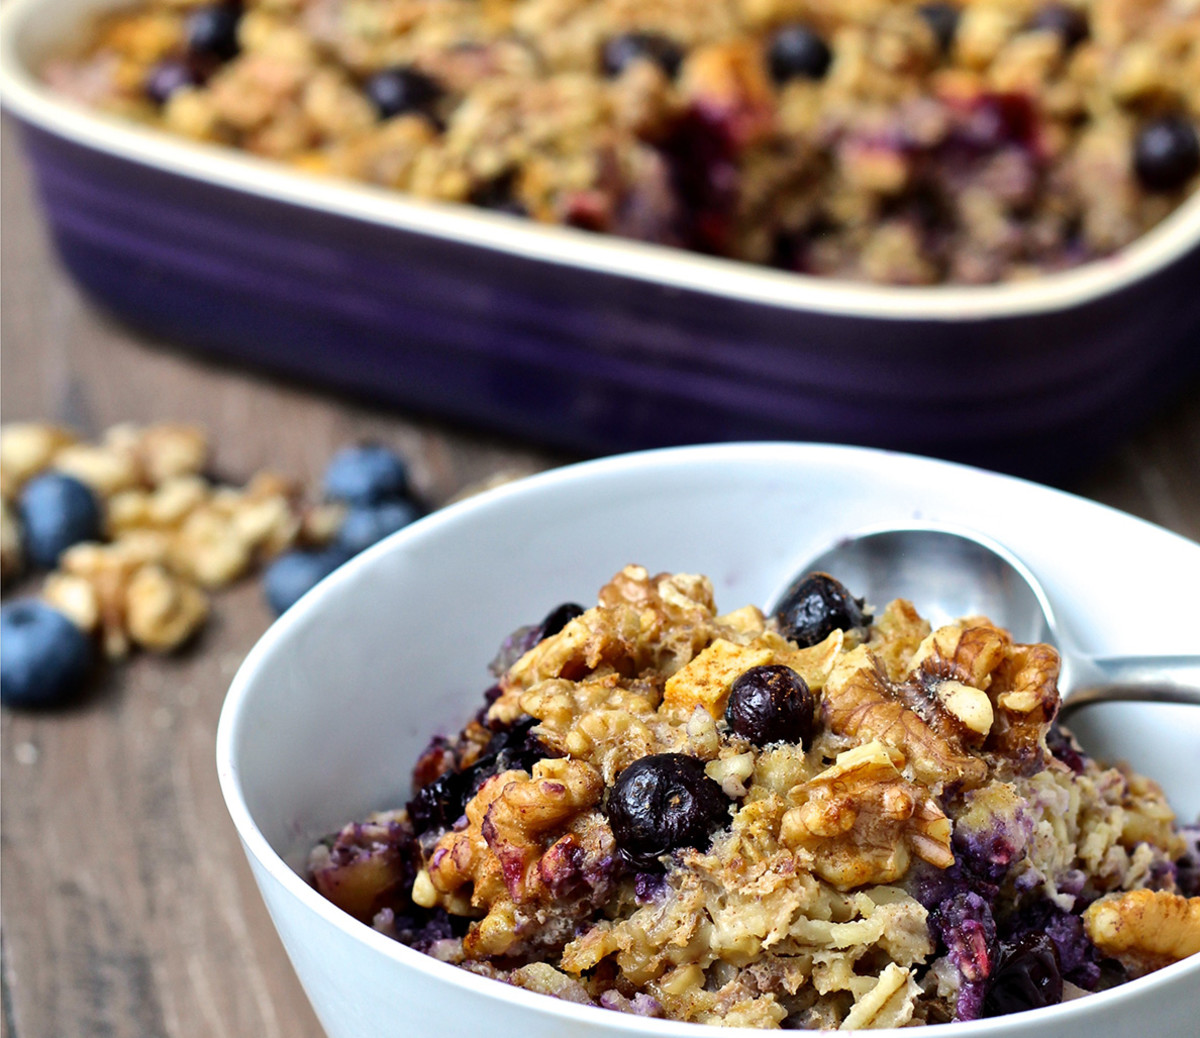 Recipe: How to Make Blueberry Apple and Walnut Baked Oatmeal - Men's ...